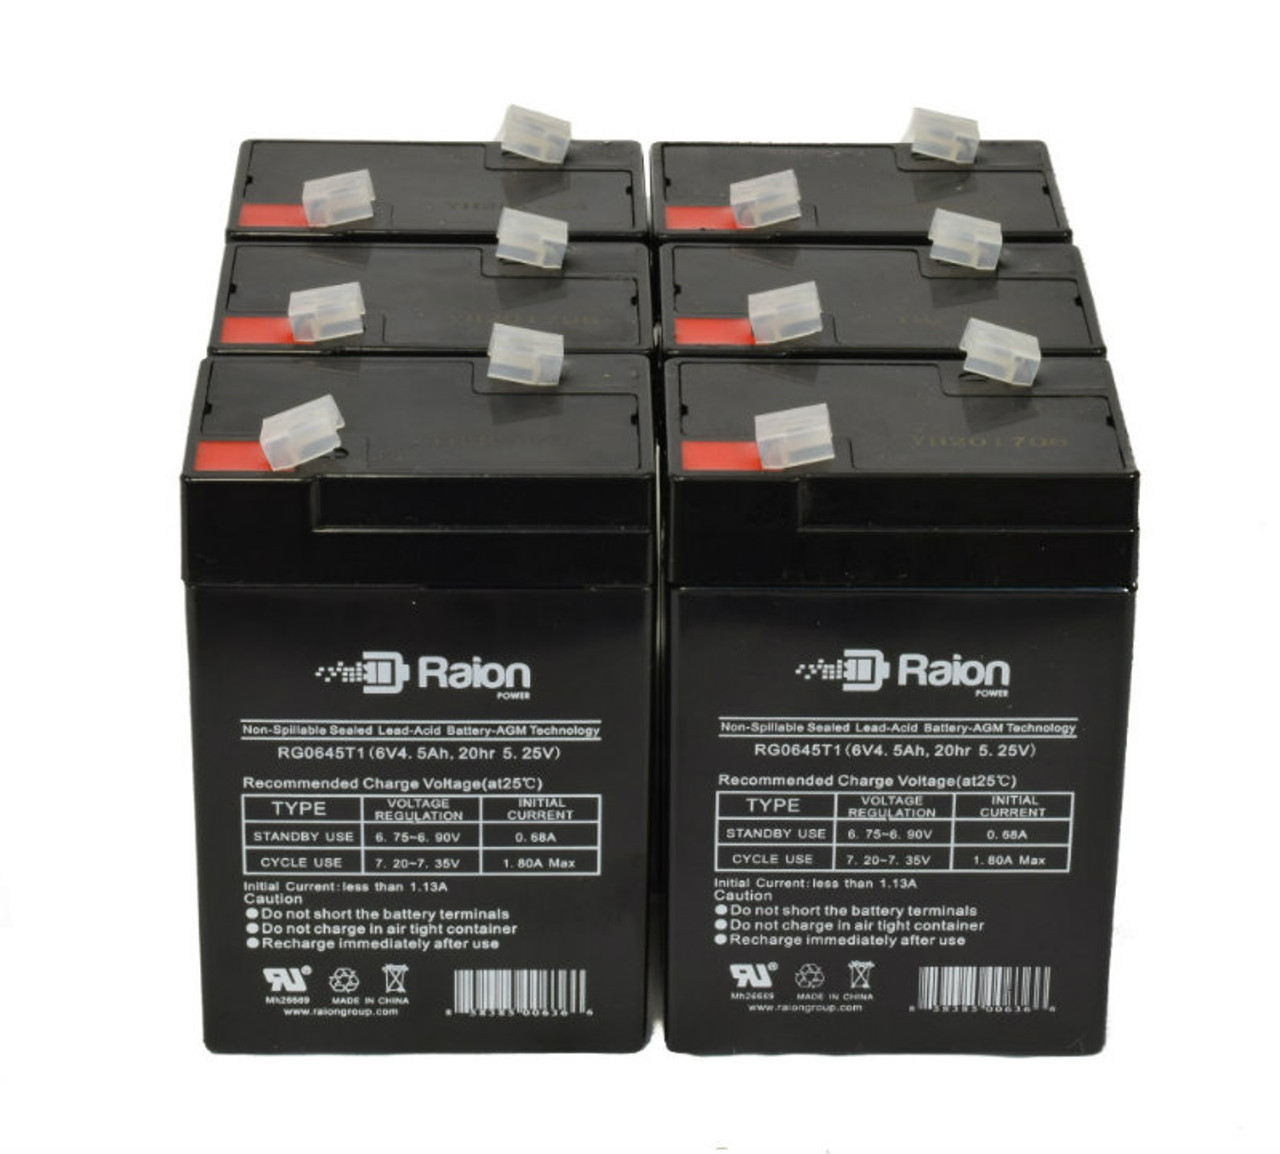 Raion Power 6 Volt 4.5Ah RG0645T1 Replacement Battery for XYC HR619W - 6 Pack